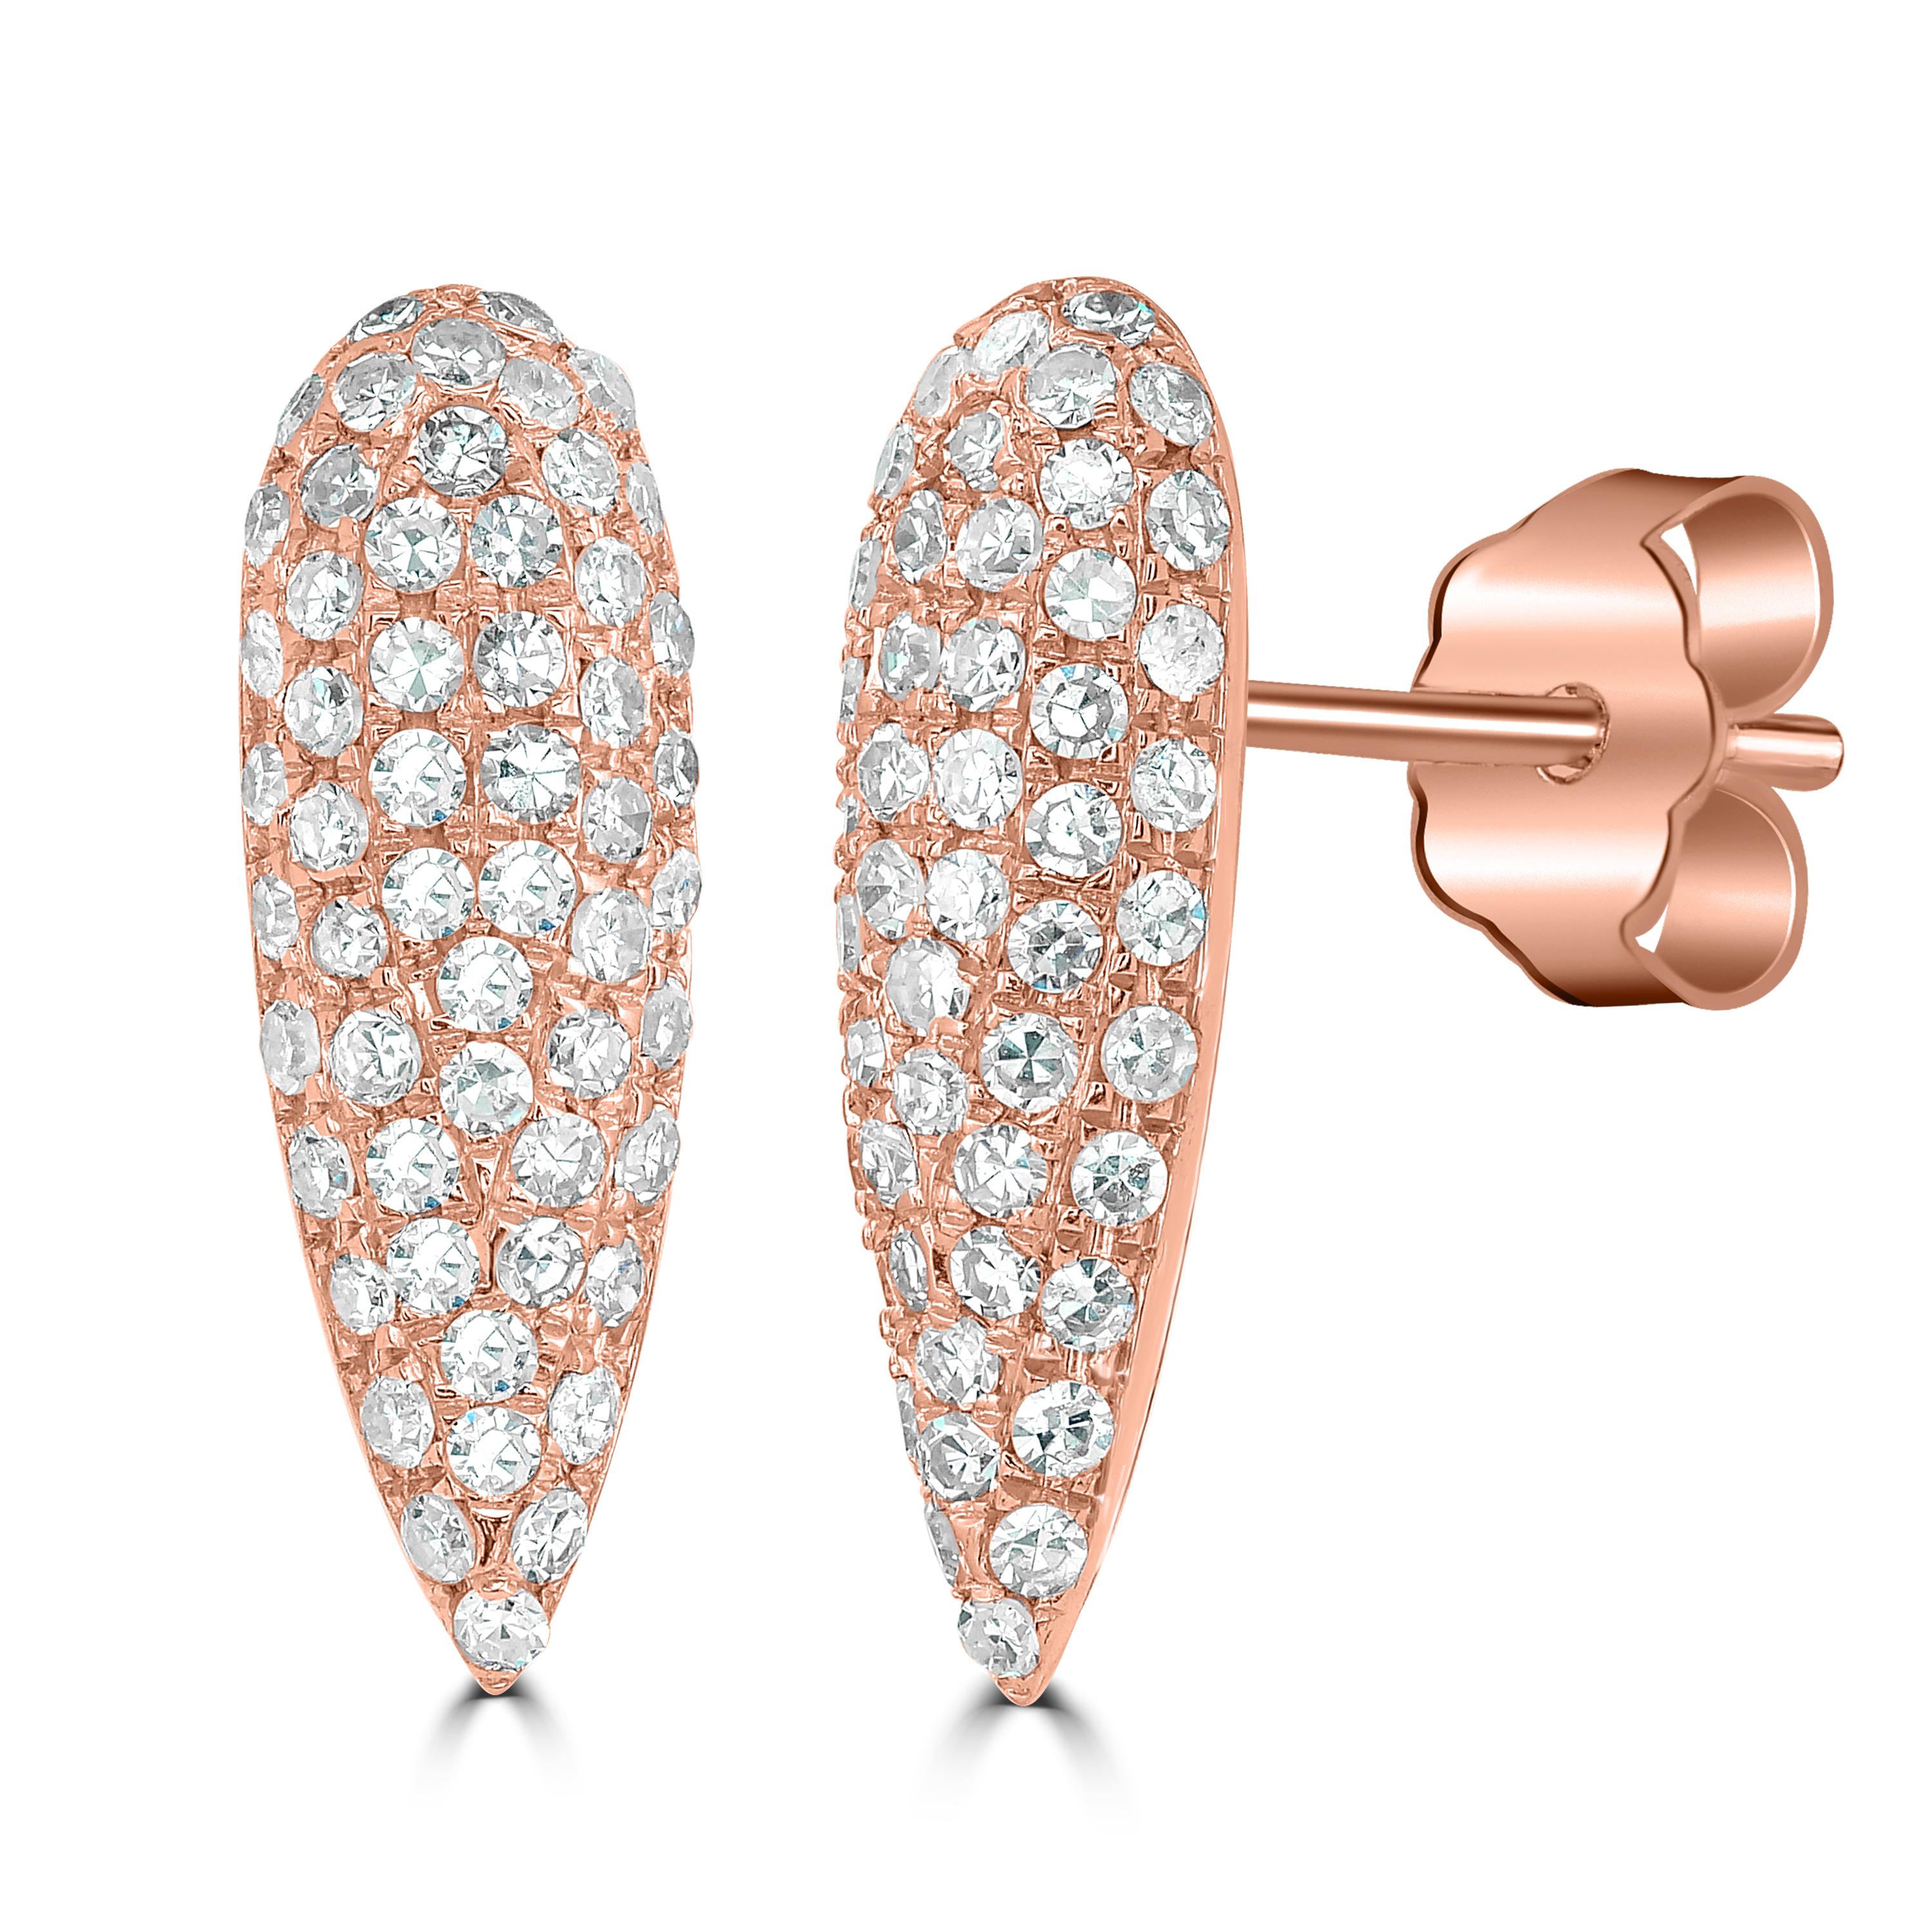 A unique pair of Luxle studs featured with pave set round cut diamonds set in a dramatic teardrop design of 14K rose gold will definitely bring a touch of glitz and glamour to any ensemble.

Please follow the Luxury Jewels storefront to view the